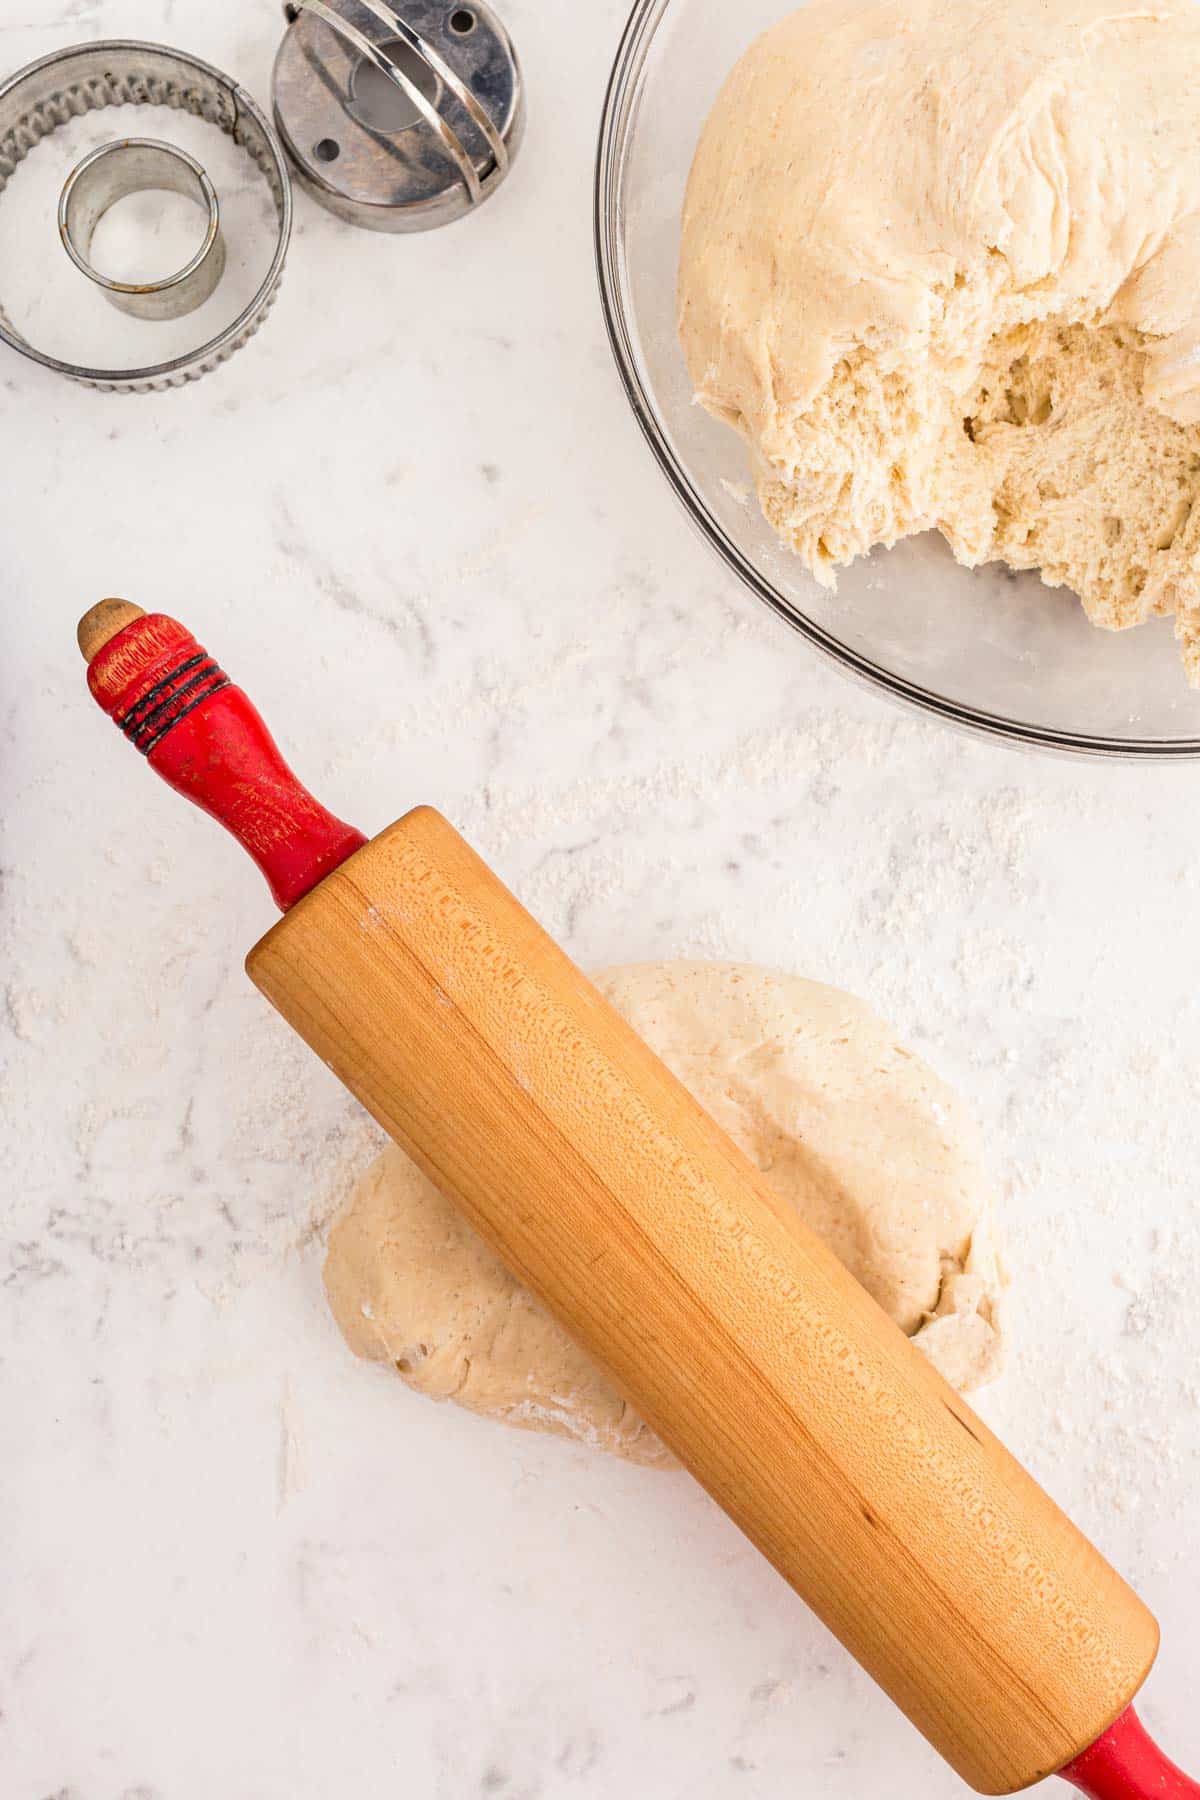 Donut dough being rolled out with a rolling pin.